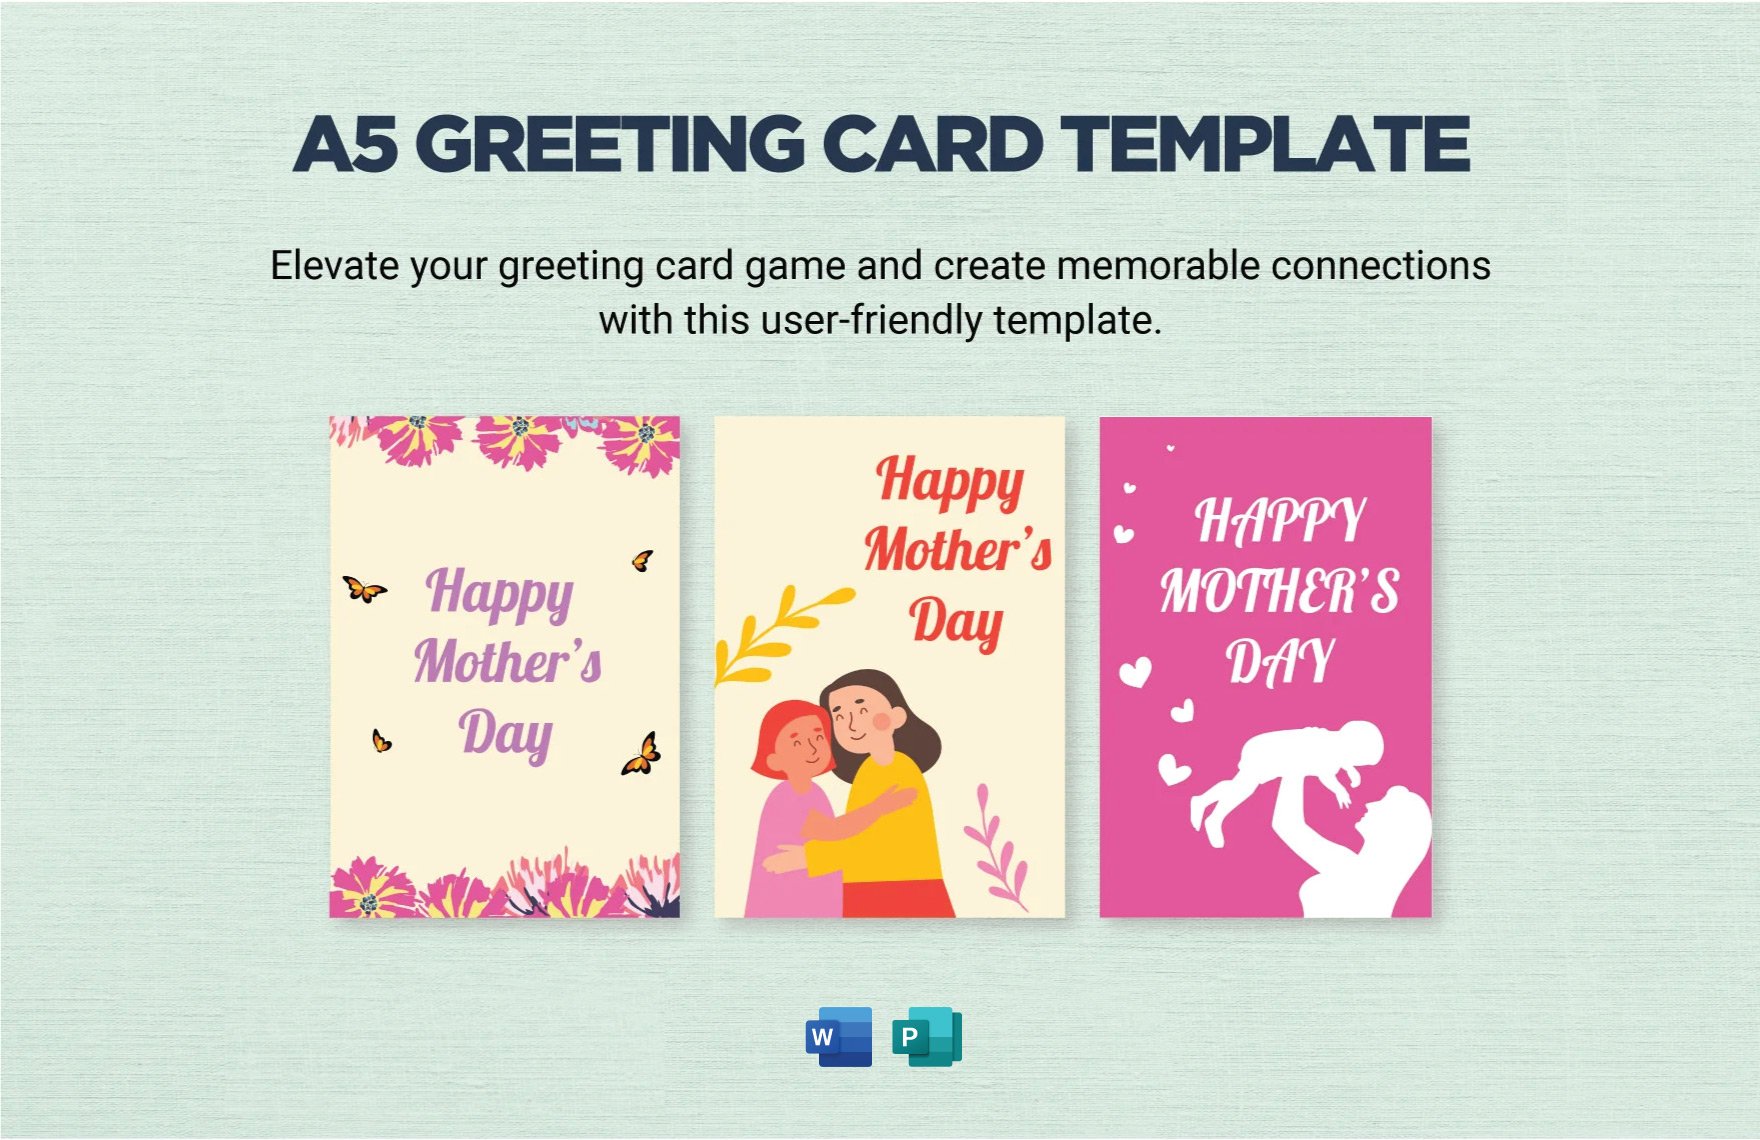 A5 Greeting Card Template in Word, Apple Pages, Publisher